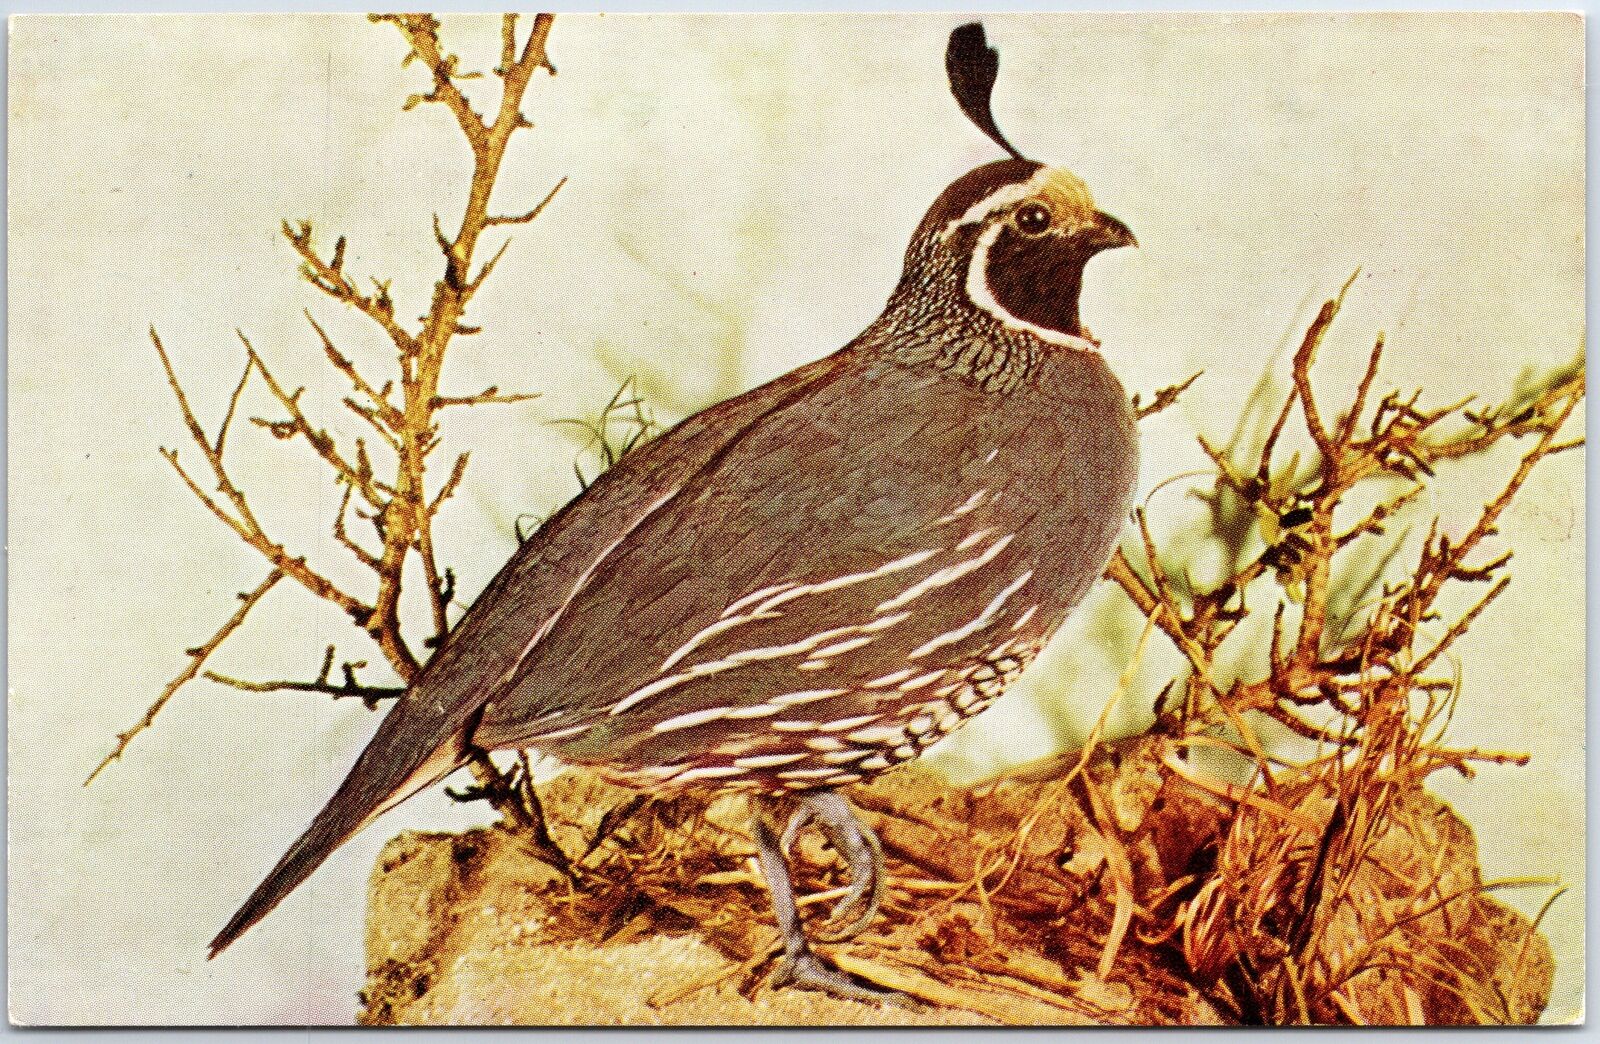 VINTAGE POSTCARD THE CALIFORNIA QUAIL EXHIBIT AT CHICAGO NATURAL HISTORY MUSEUM